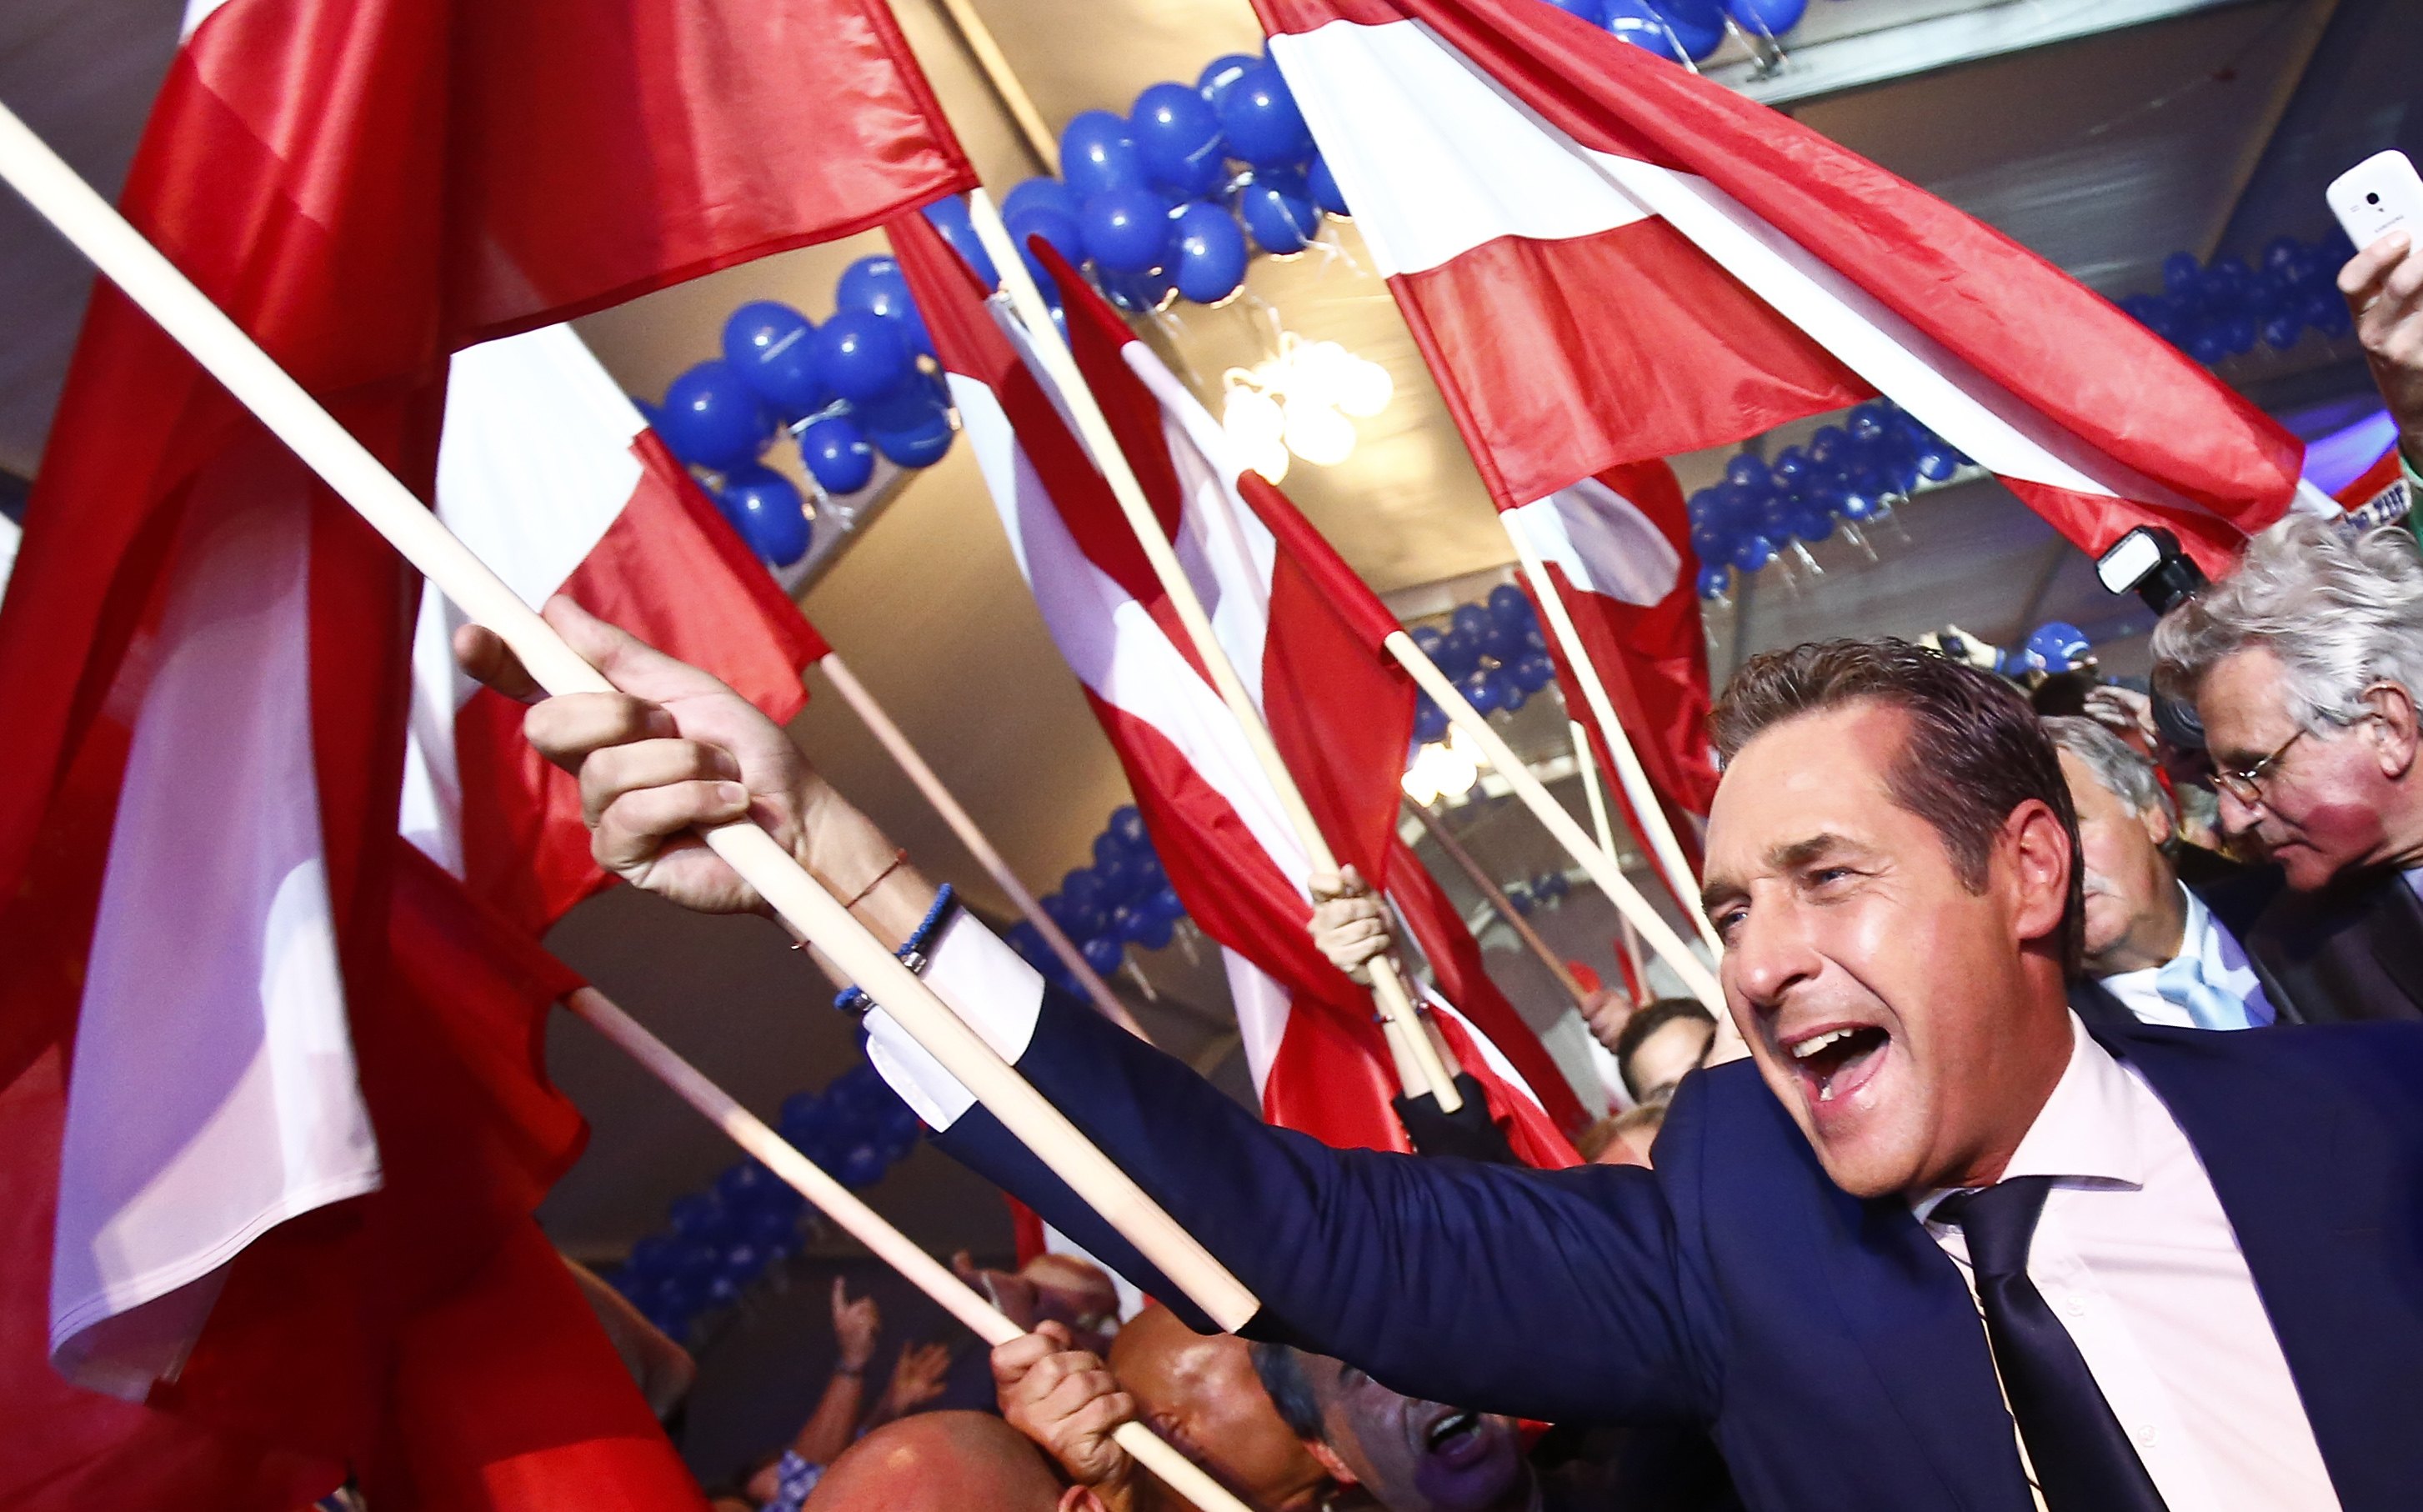 Head of the Freedom Party (FPOe) Heinz-Christian Strache celebrates with his supporters after the Austrian general election in Vienna. Photo: Reuters